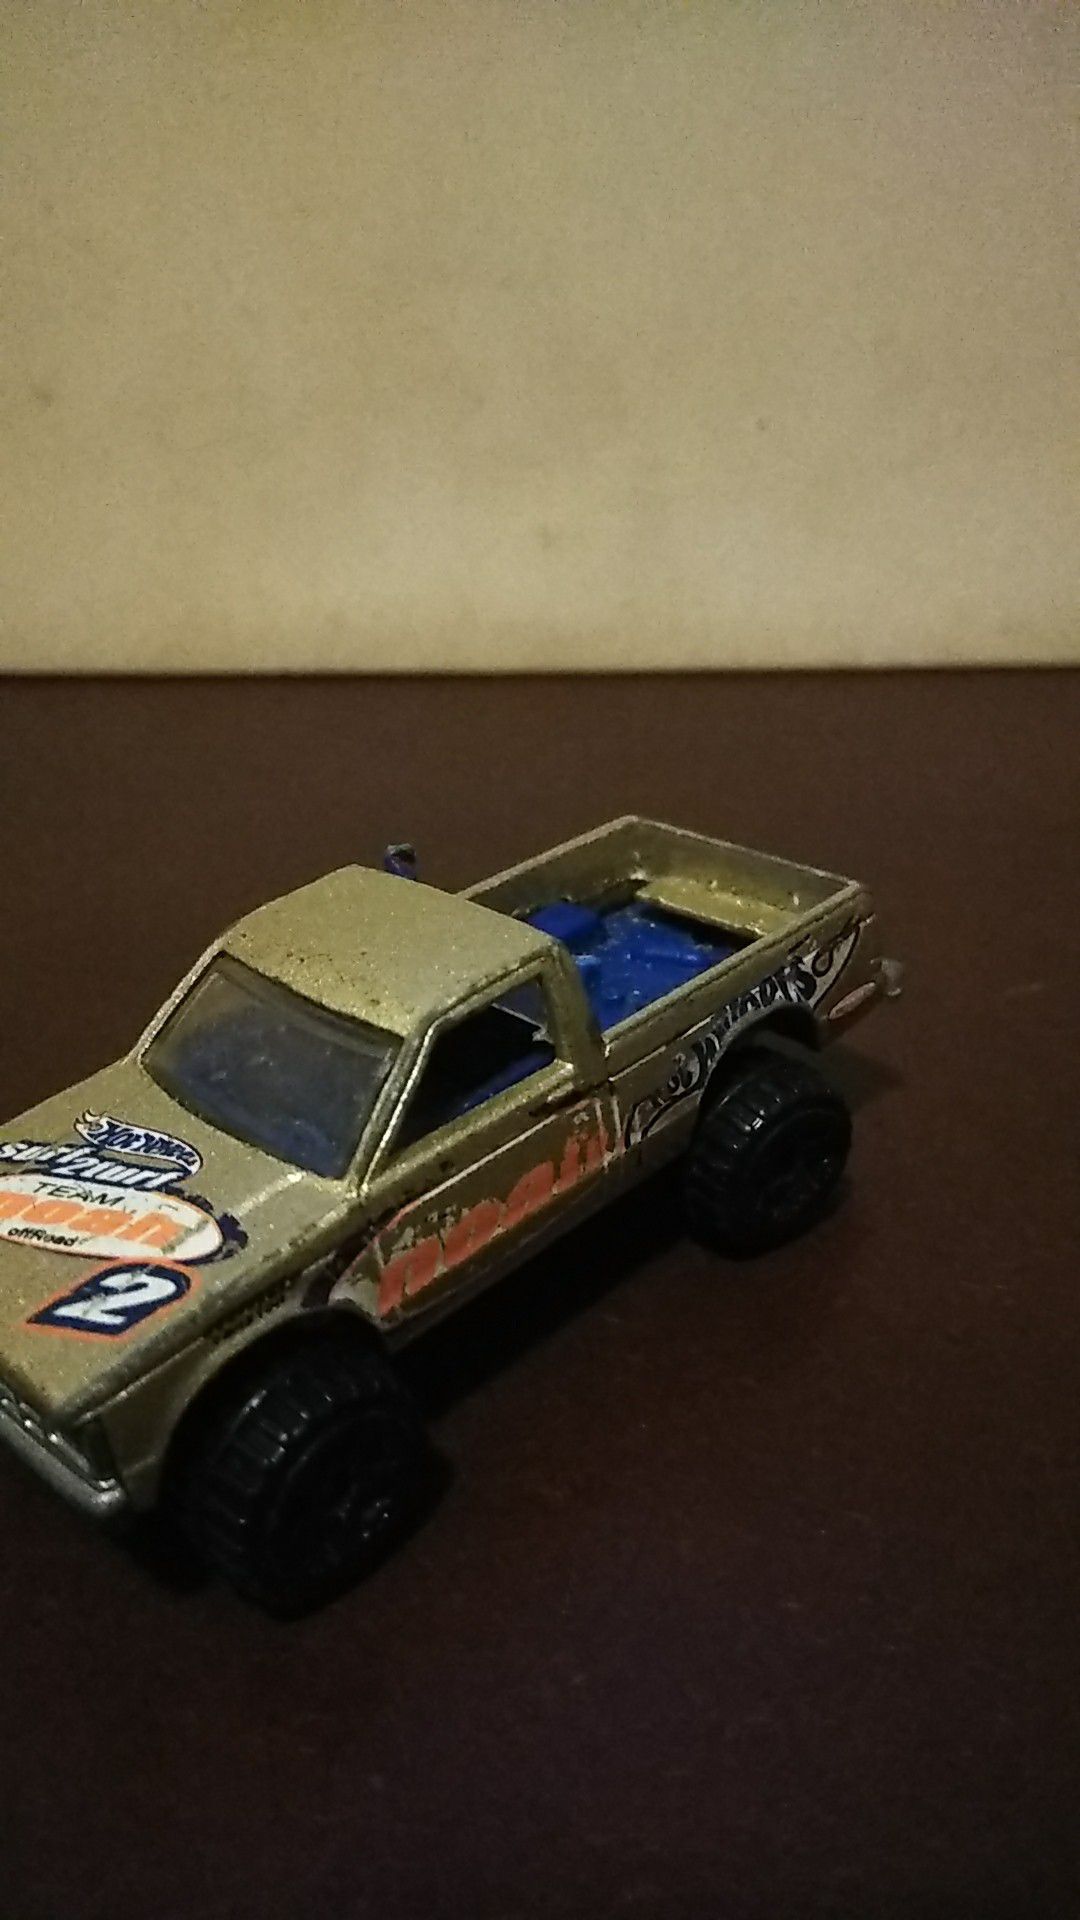 Hot wheels collectible